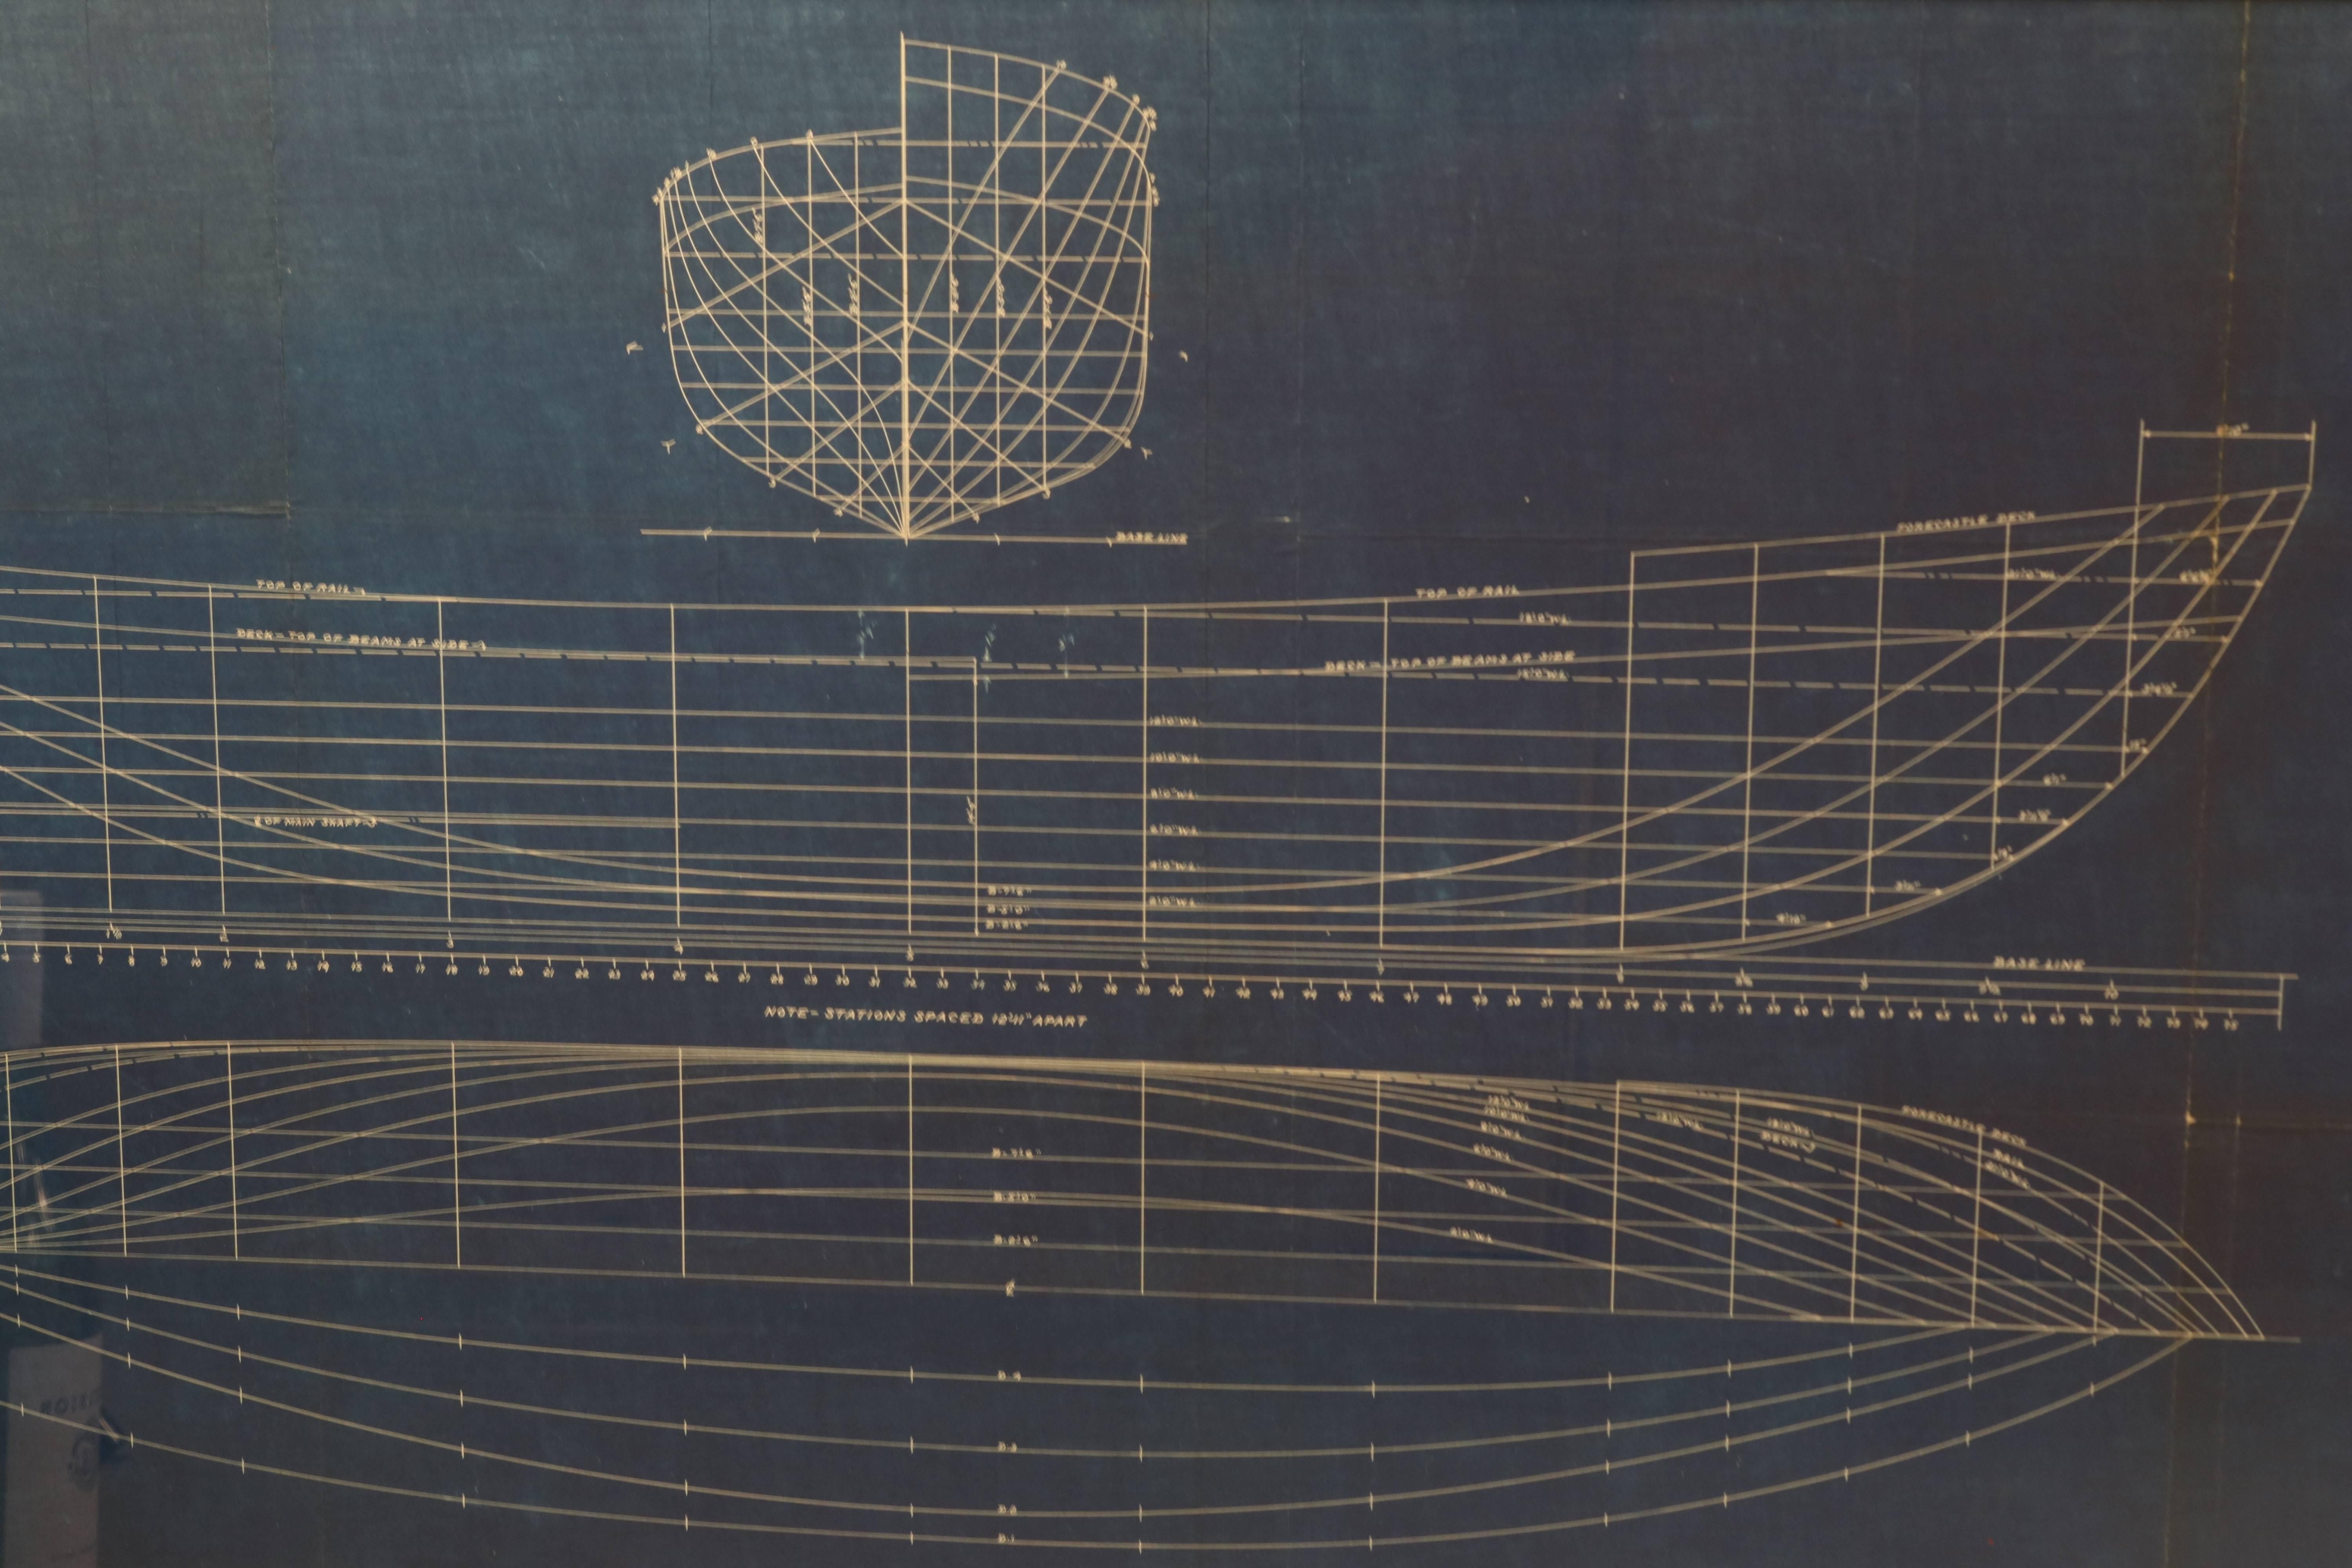 Early 20th century blueprint by John Alden of a General Seafoods Corp. trawler dated 2/24/37. Hull Lines are shown from bow, profile and bottom views. Nicely framed. Scale: 1/4 inch = 1 foot.
Plan no. 643 drawn by "Winslow".